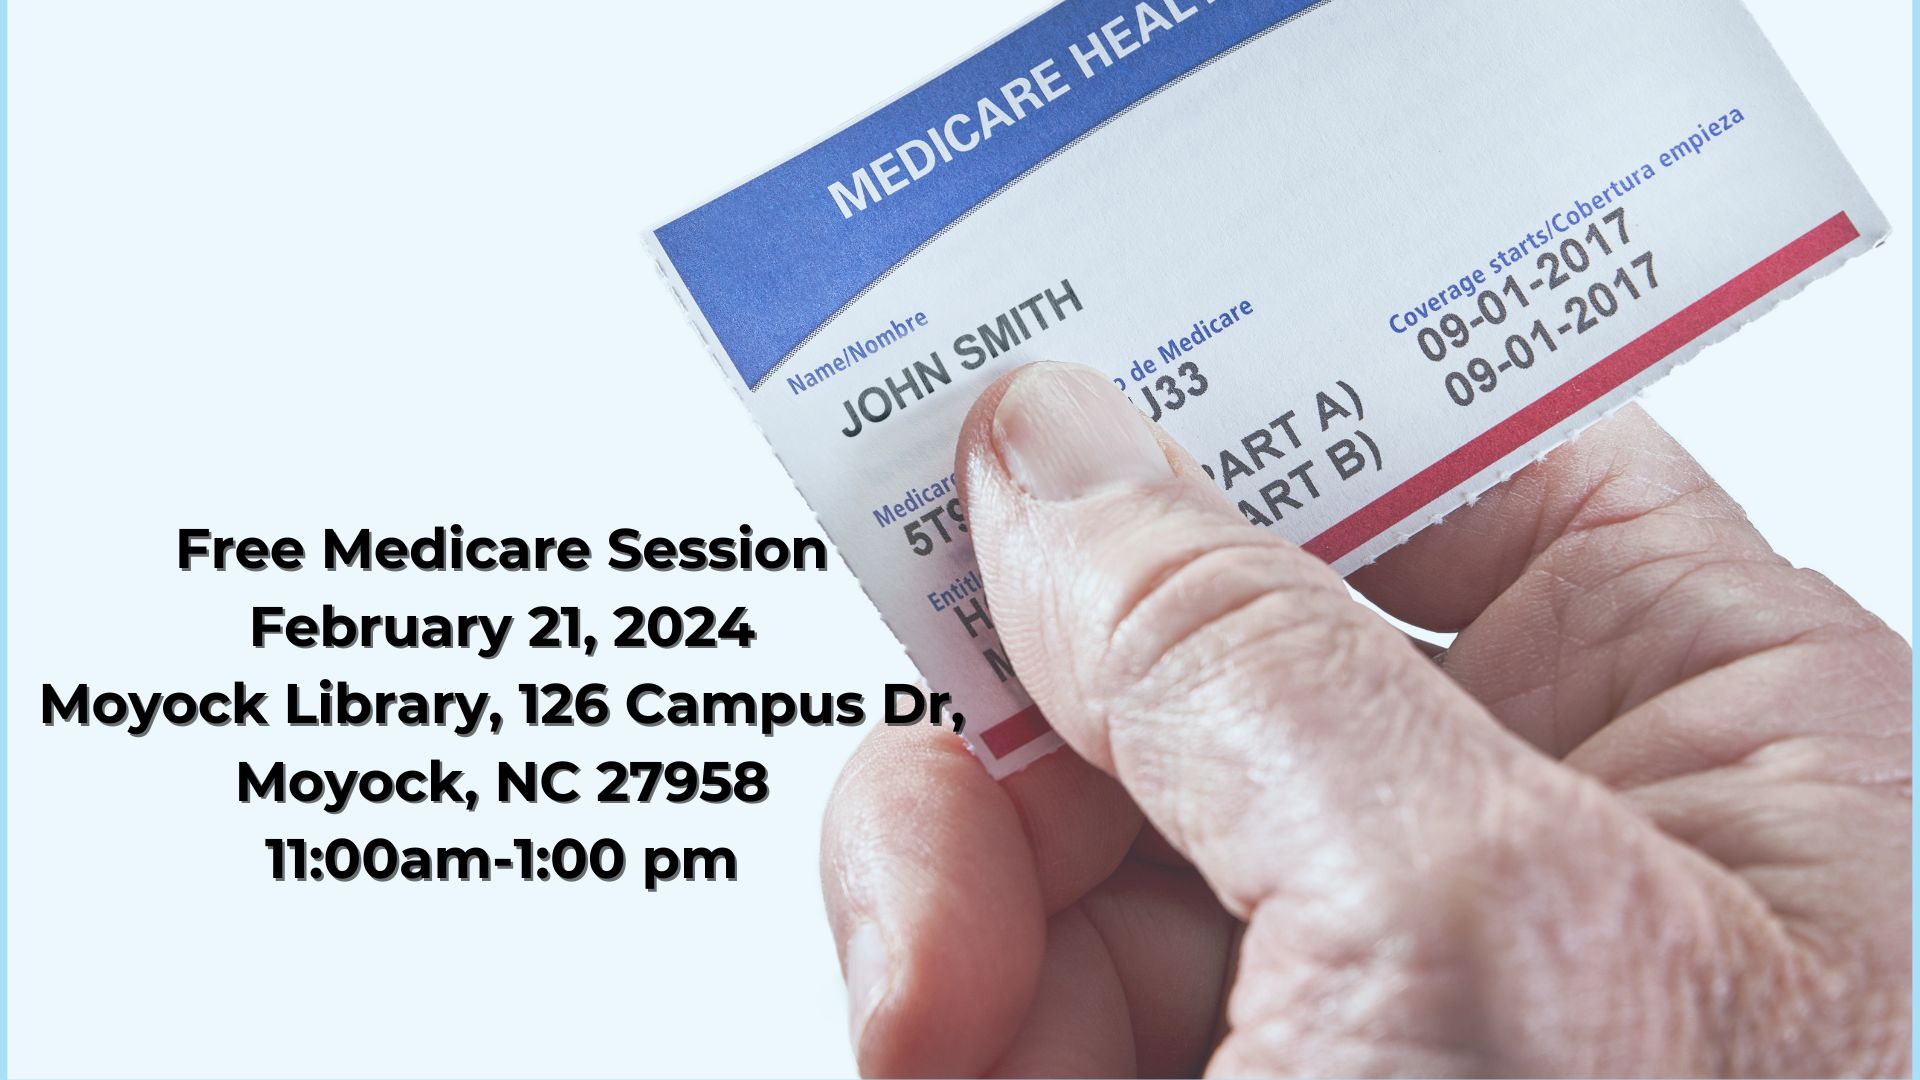 Medicare card being held in a hand